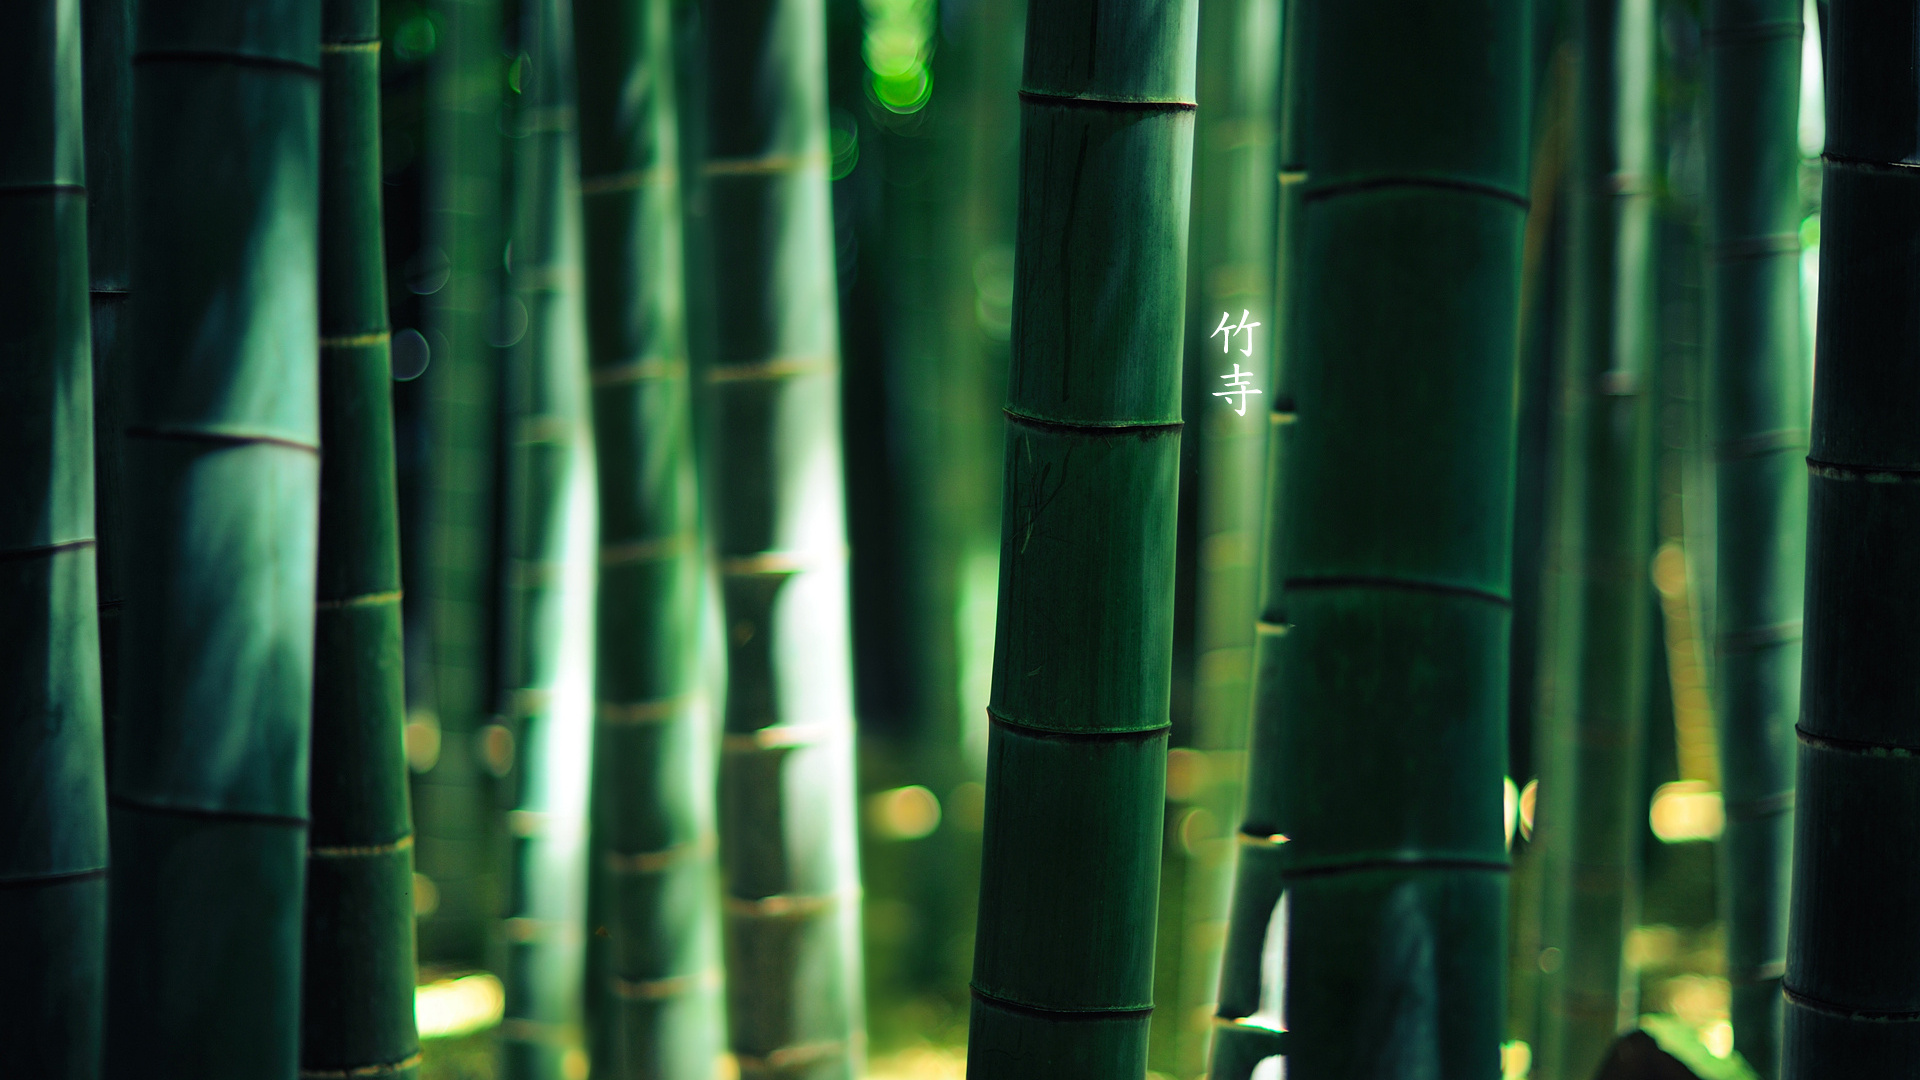 Download 1440p Bamboo Background Very Dark Green Stems And Leaves   Wallpaperscom